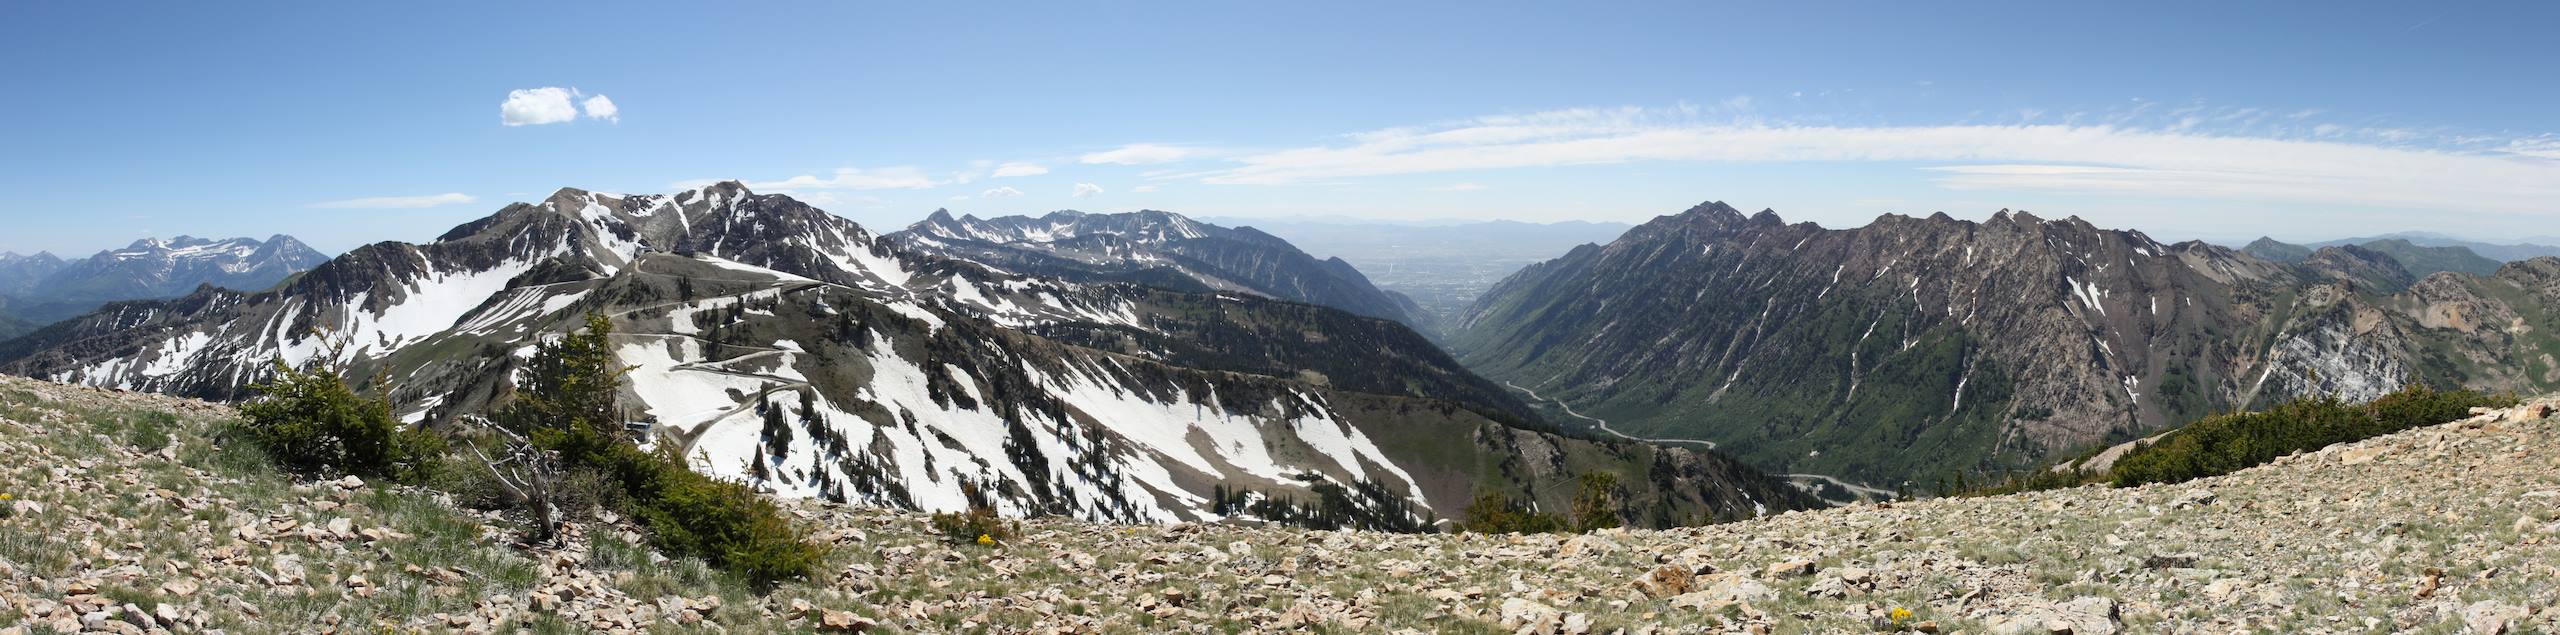 A panorama from the trig station on the top of Mount Baldy, Alta, Utah.